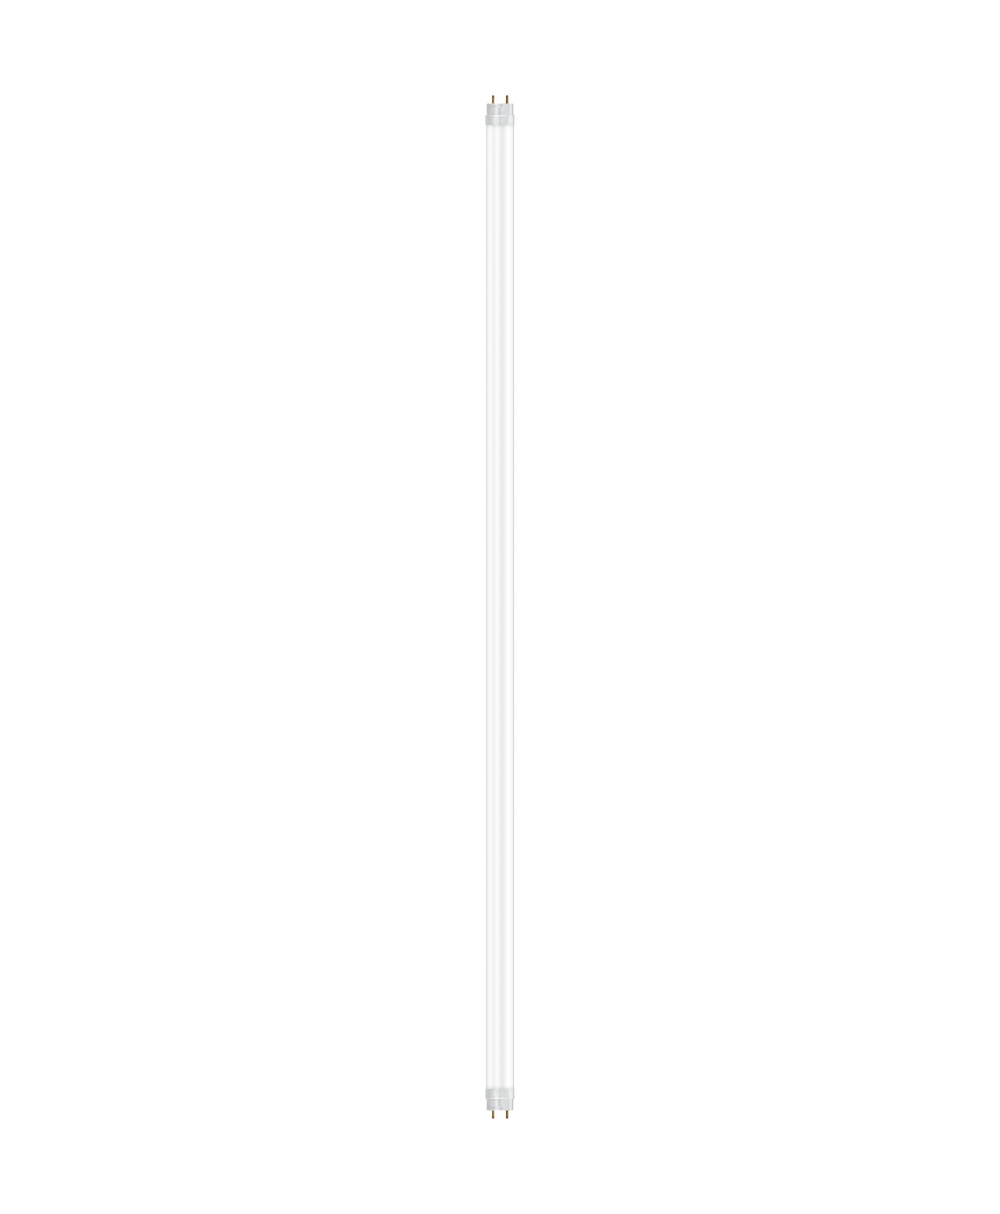 Ledvance LED tube LED TUBE T8 EM ULTRA OUTPUT S 1200 mm 14W 865 – 4099854037191 – replacement for 36 W - 4099854037191